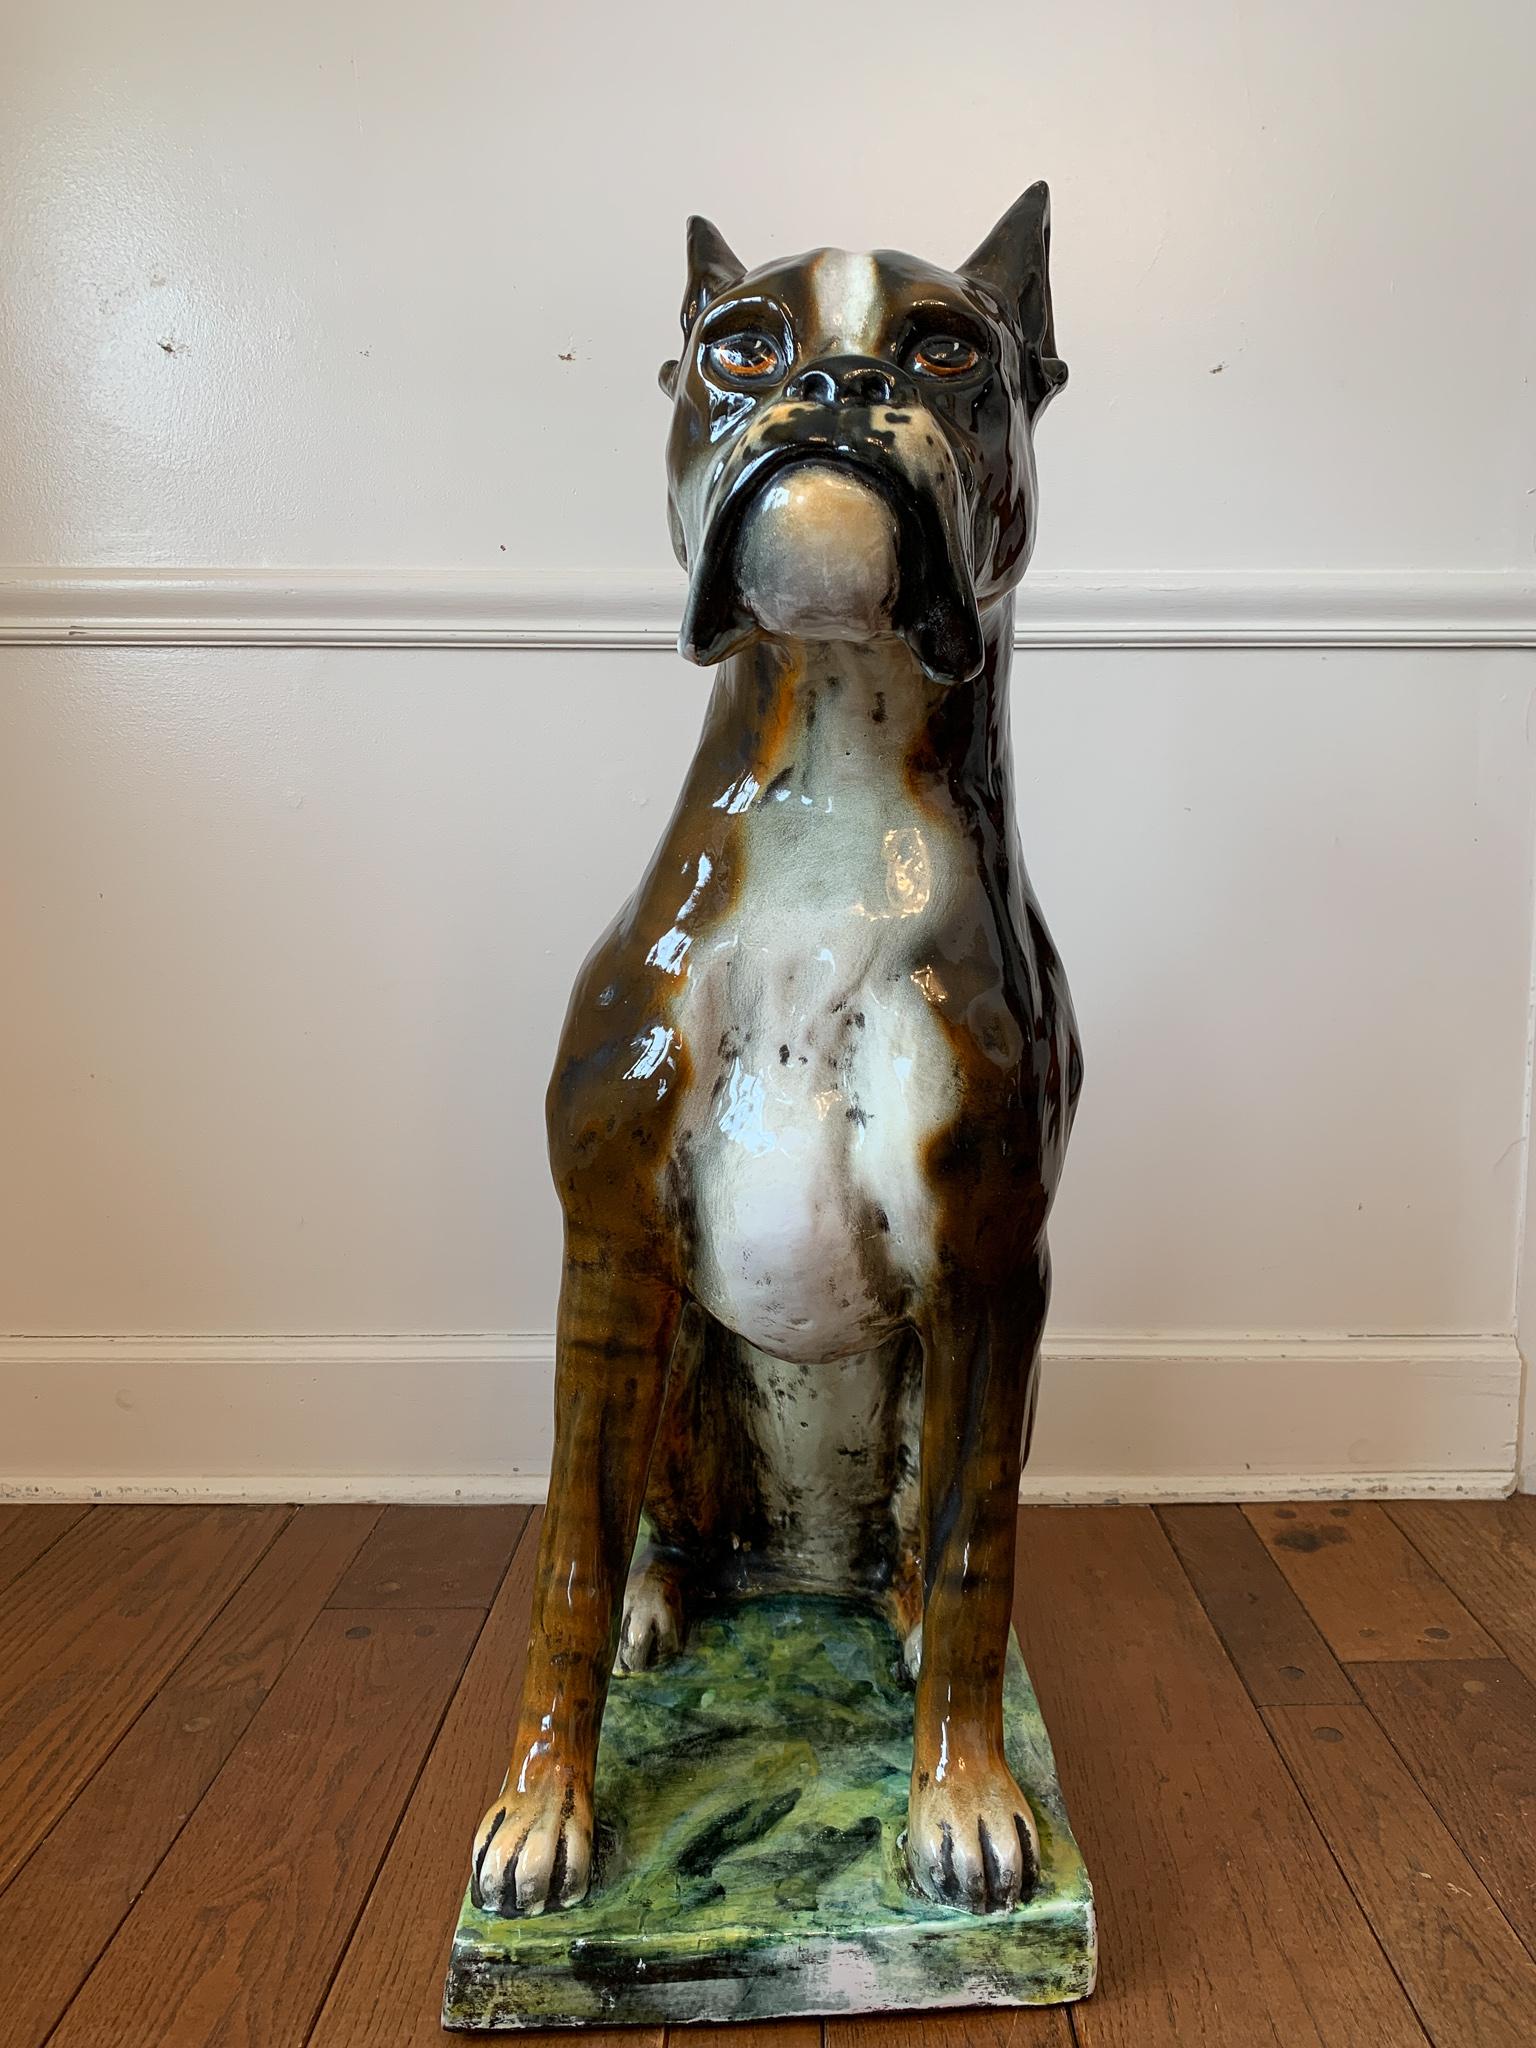 An amazing glazed ceramic life size & signed sculpture of a dog-Boxer by legendary designer-maker Ugo Zaccagnini, Italy, 1960s. This amazing and rare sculpture of 